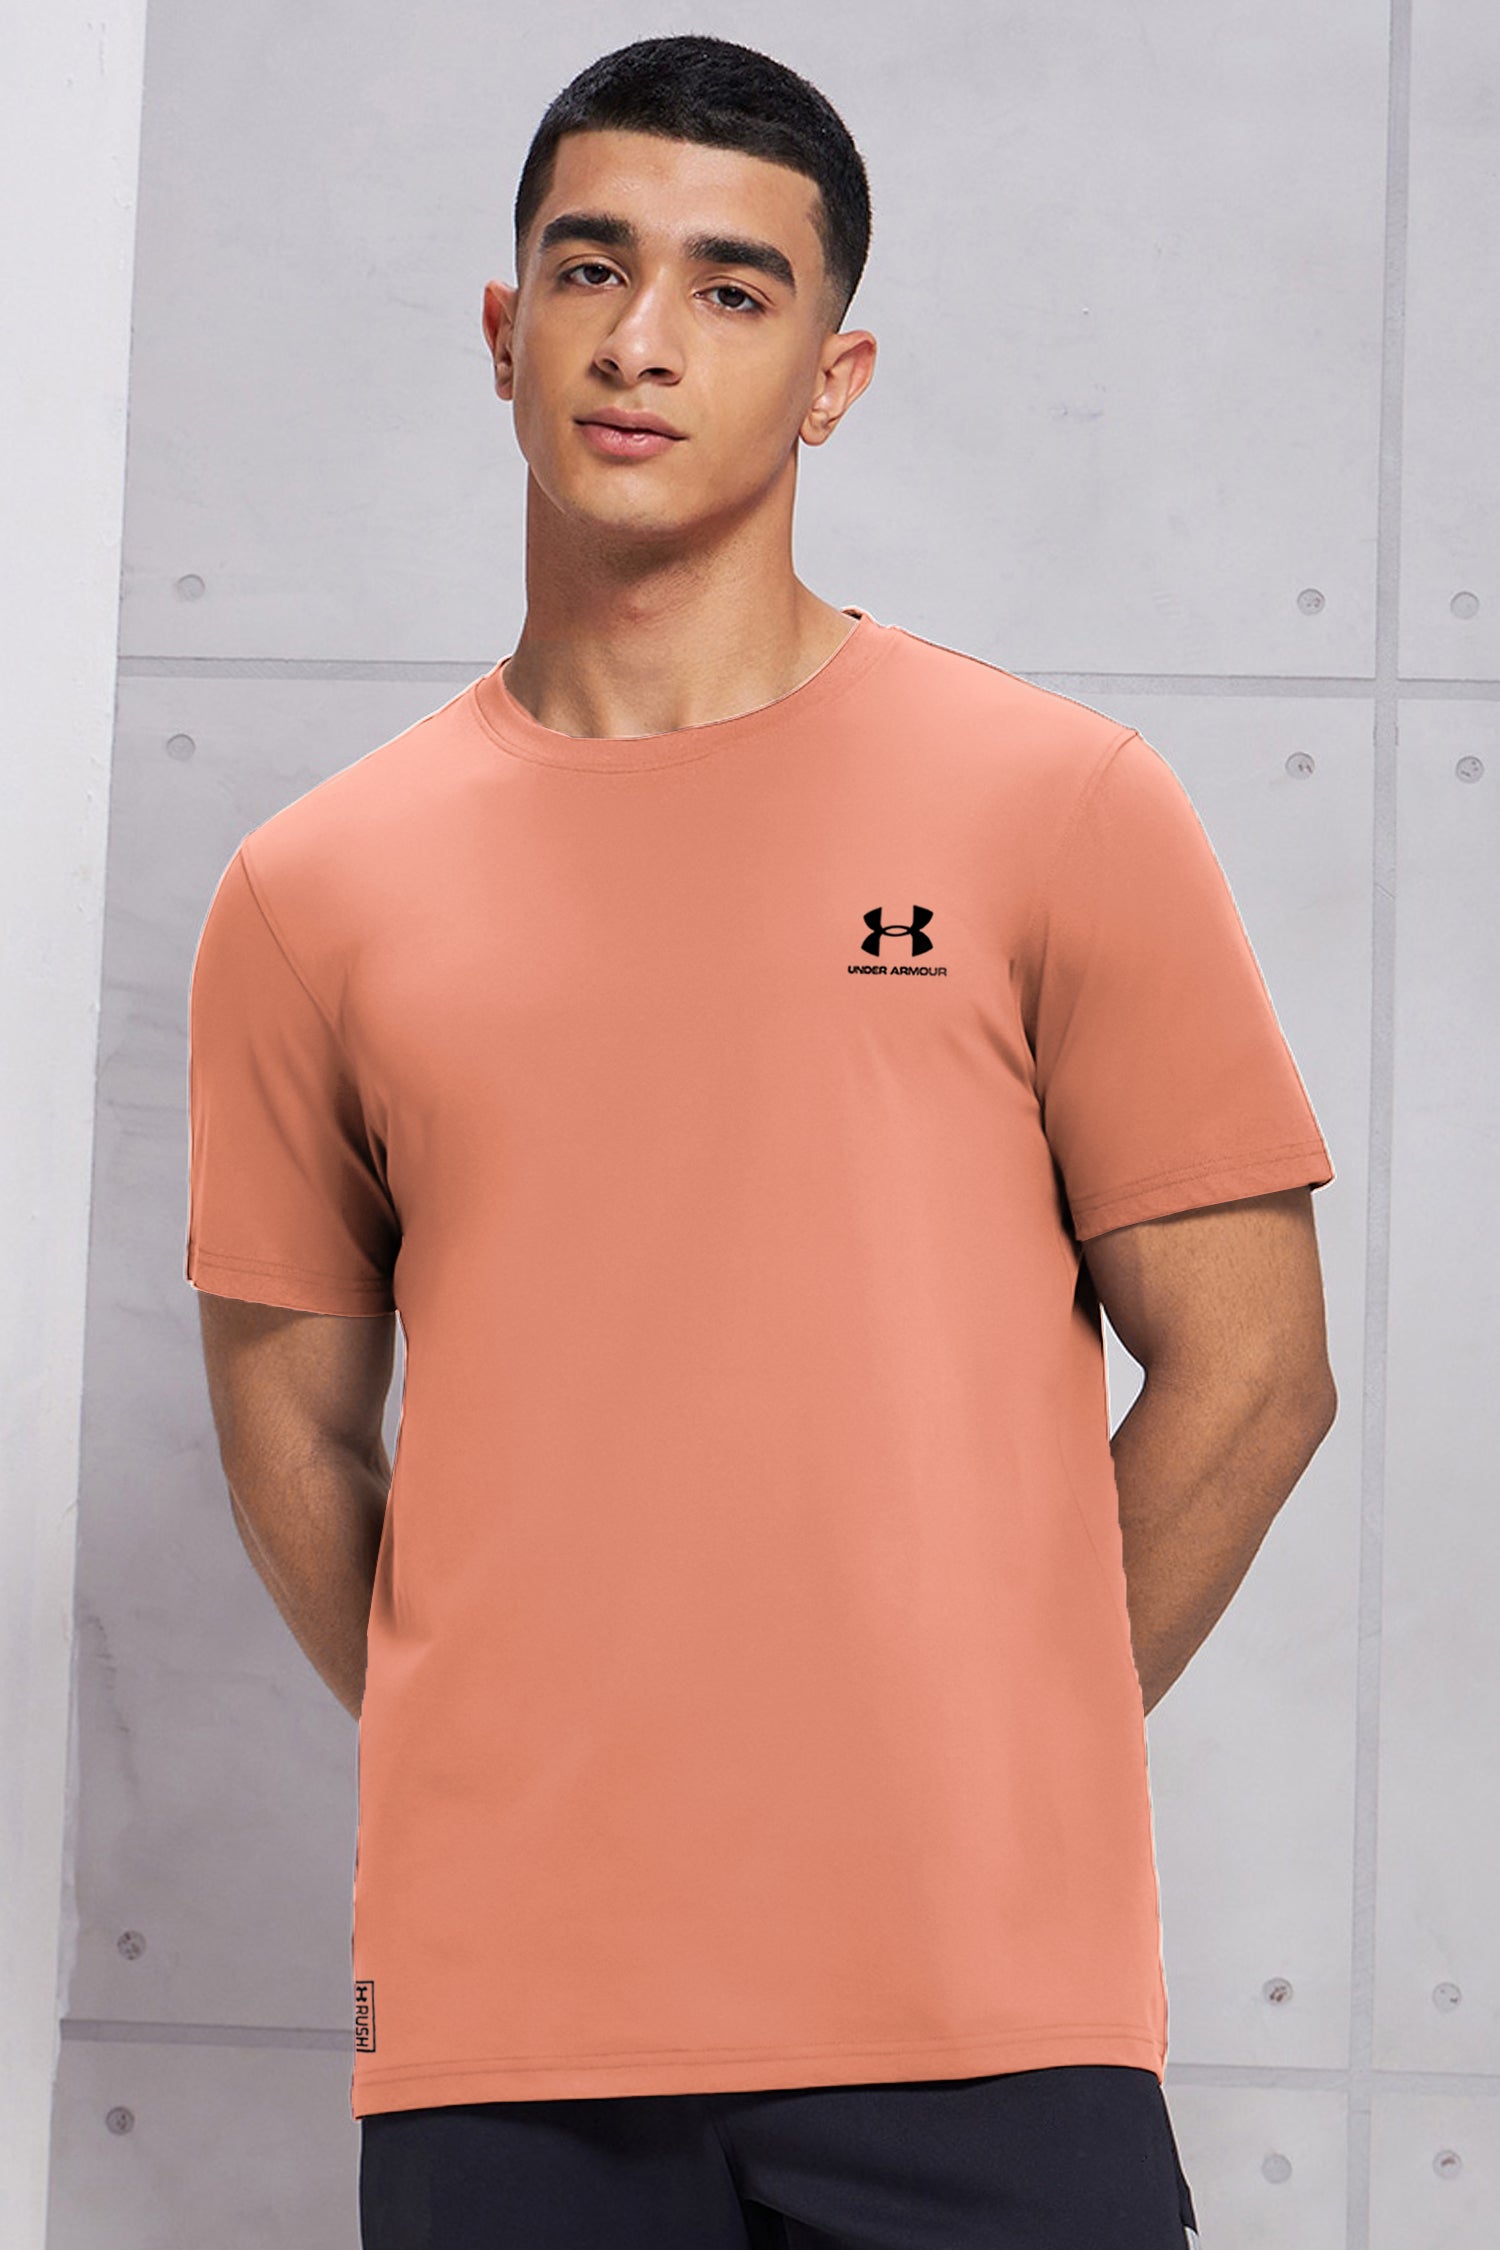 Undr Armur Front Logo Dry Fit Tee